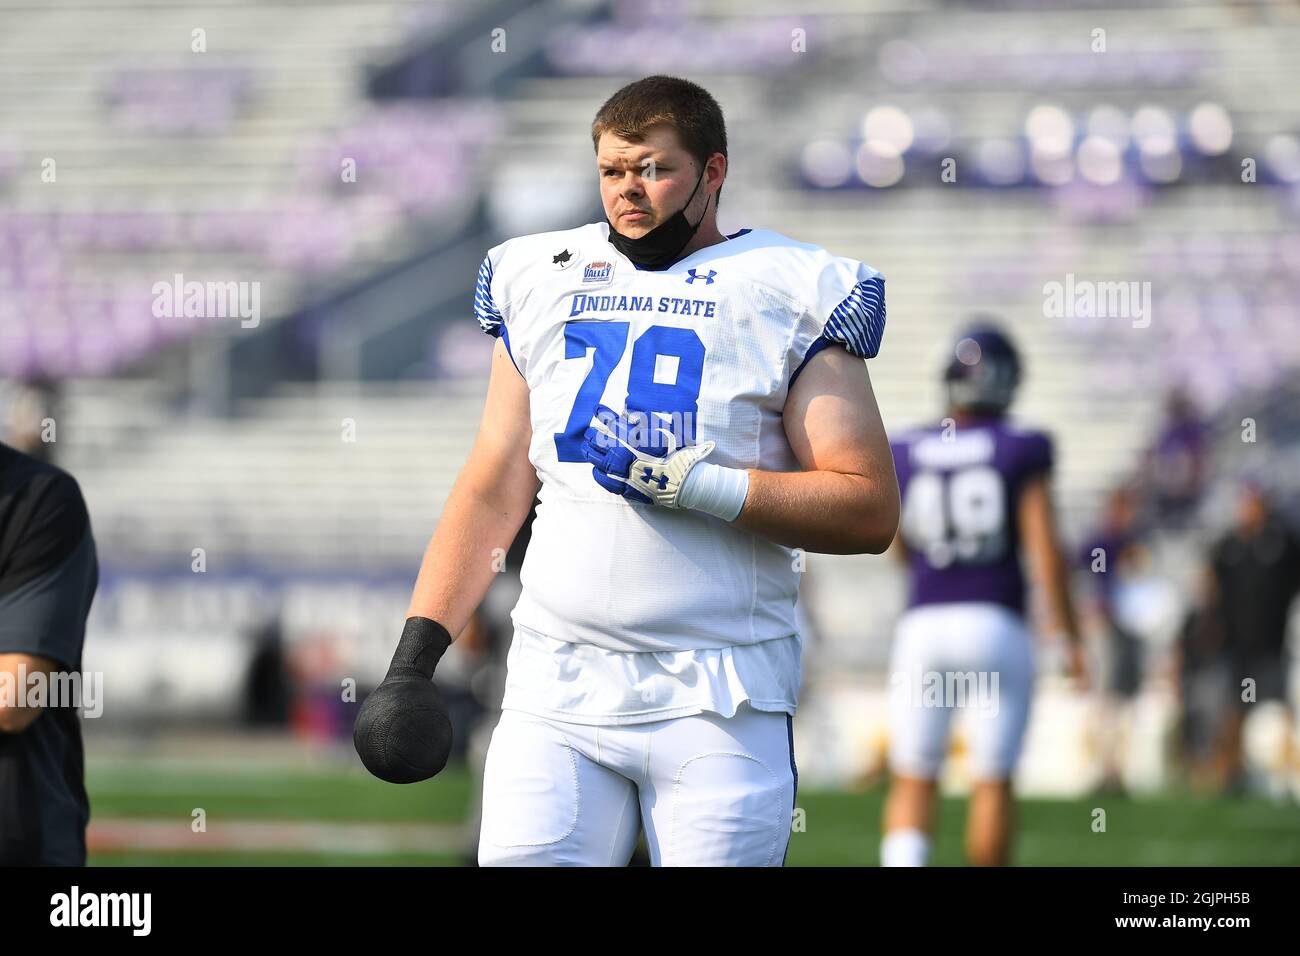 Evanston, Illinois, USA. 11th Sep, 2021. Joel Stevens #78 of the Indiana State Sycamores in action during the NCAA football game between the Northwestern Wildcats vs Indiana State Sycamores at Ryan Field in Evanston, Illinois. Dean Reid/CSM/Alamy Live News Stock Photo